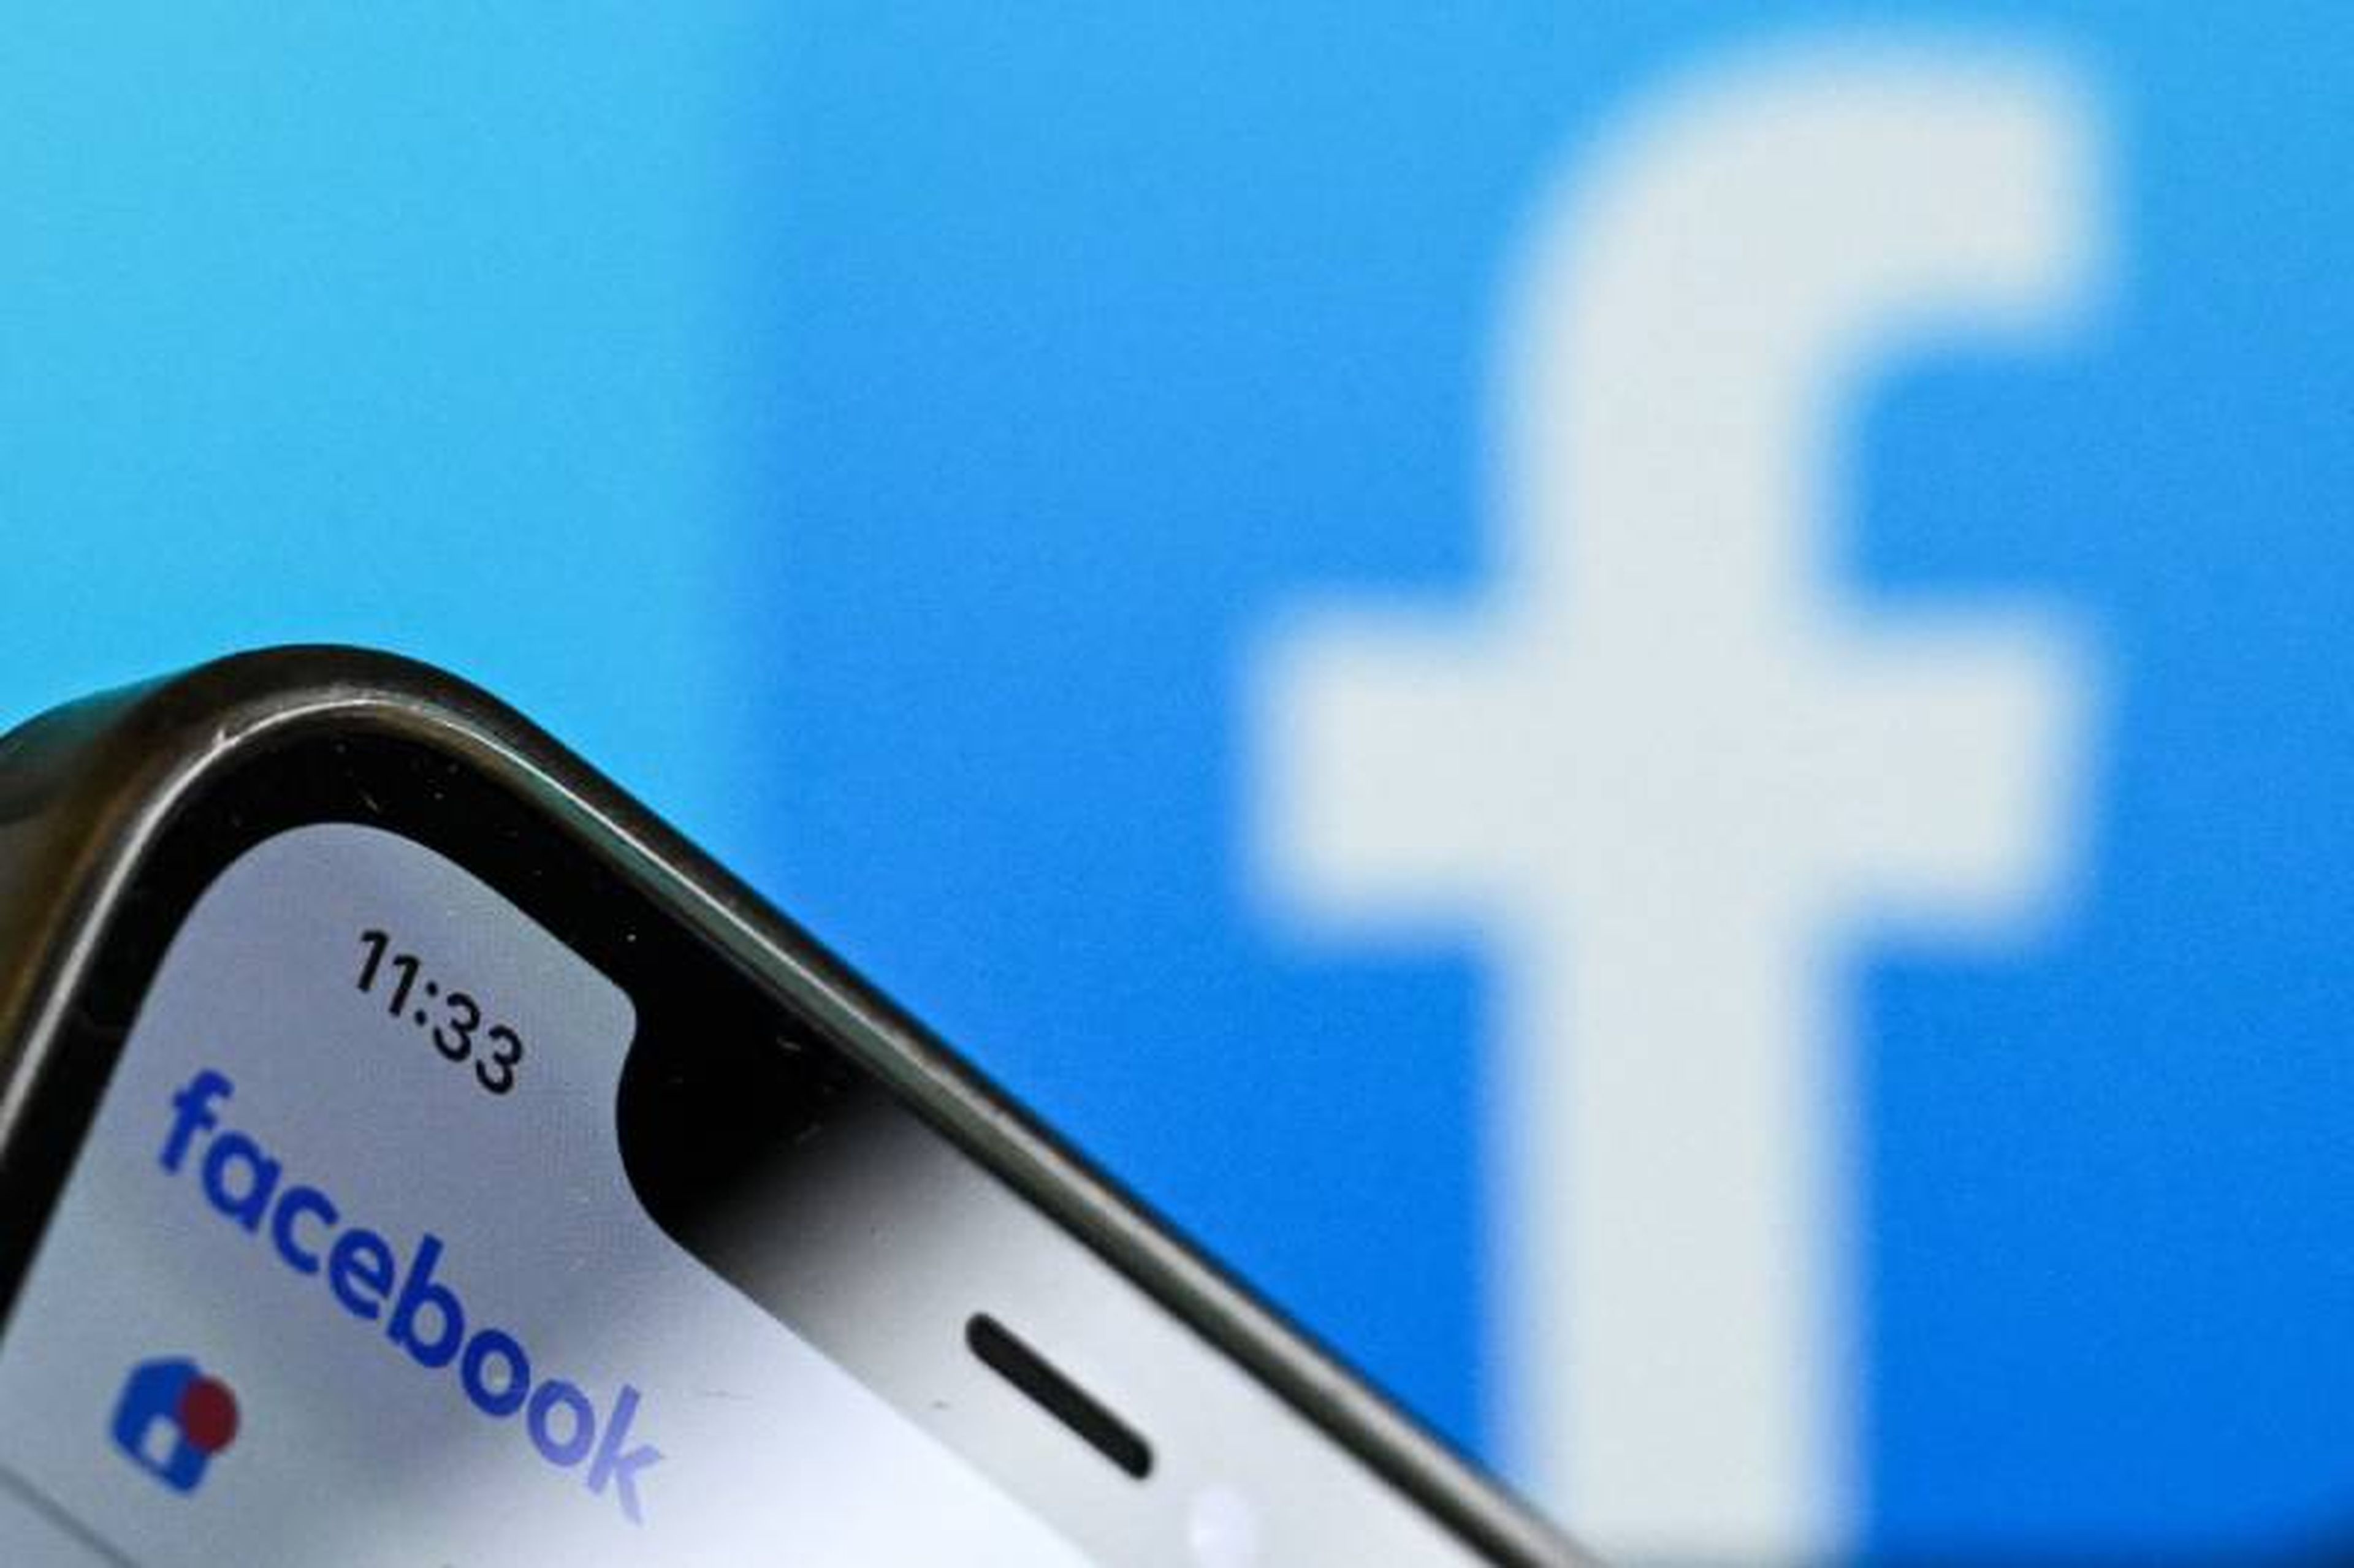 the logo of US online social media and social networking service Facebook on a smartphone screen